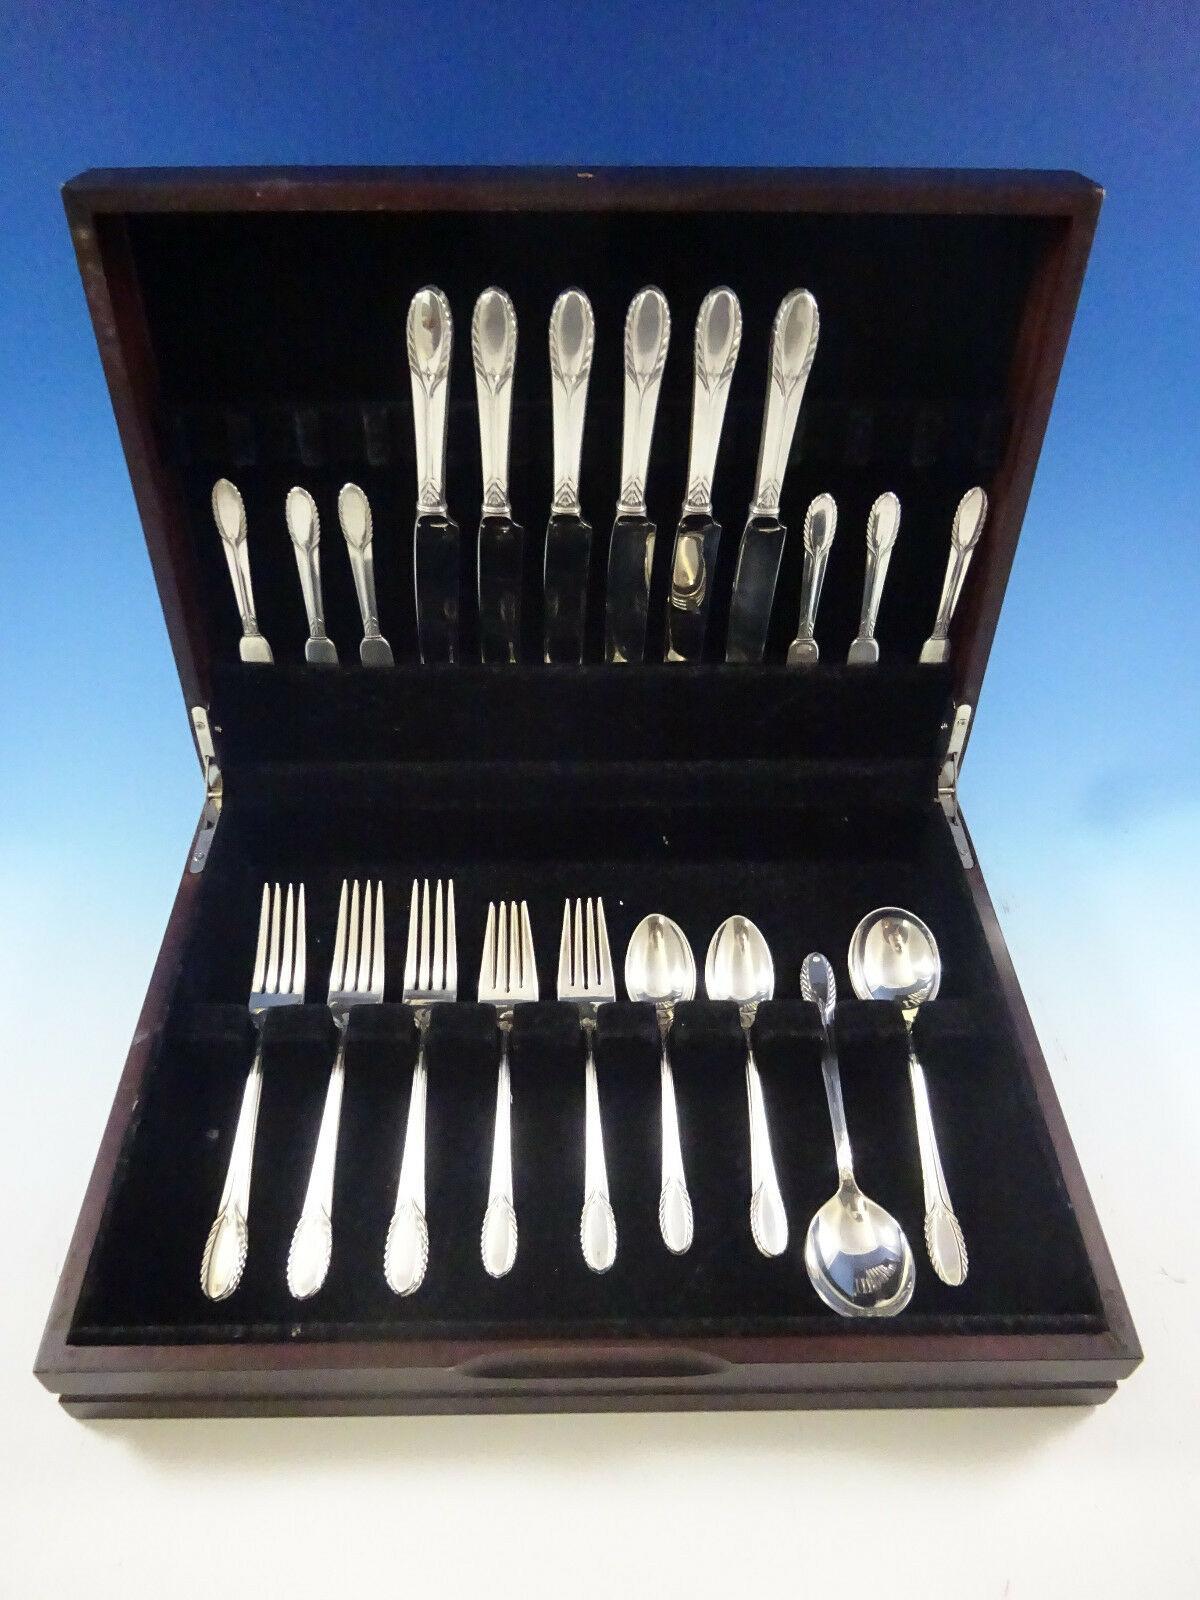 Stunning Trousseau by International Sterling Silver flatware set - 36 pieces. This set includes:

6 knives, 9 1/8